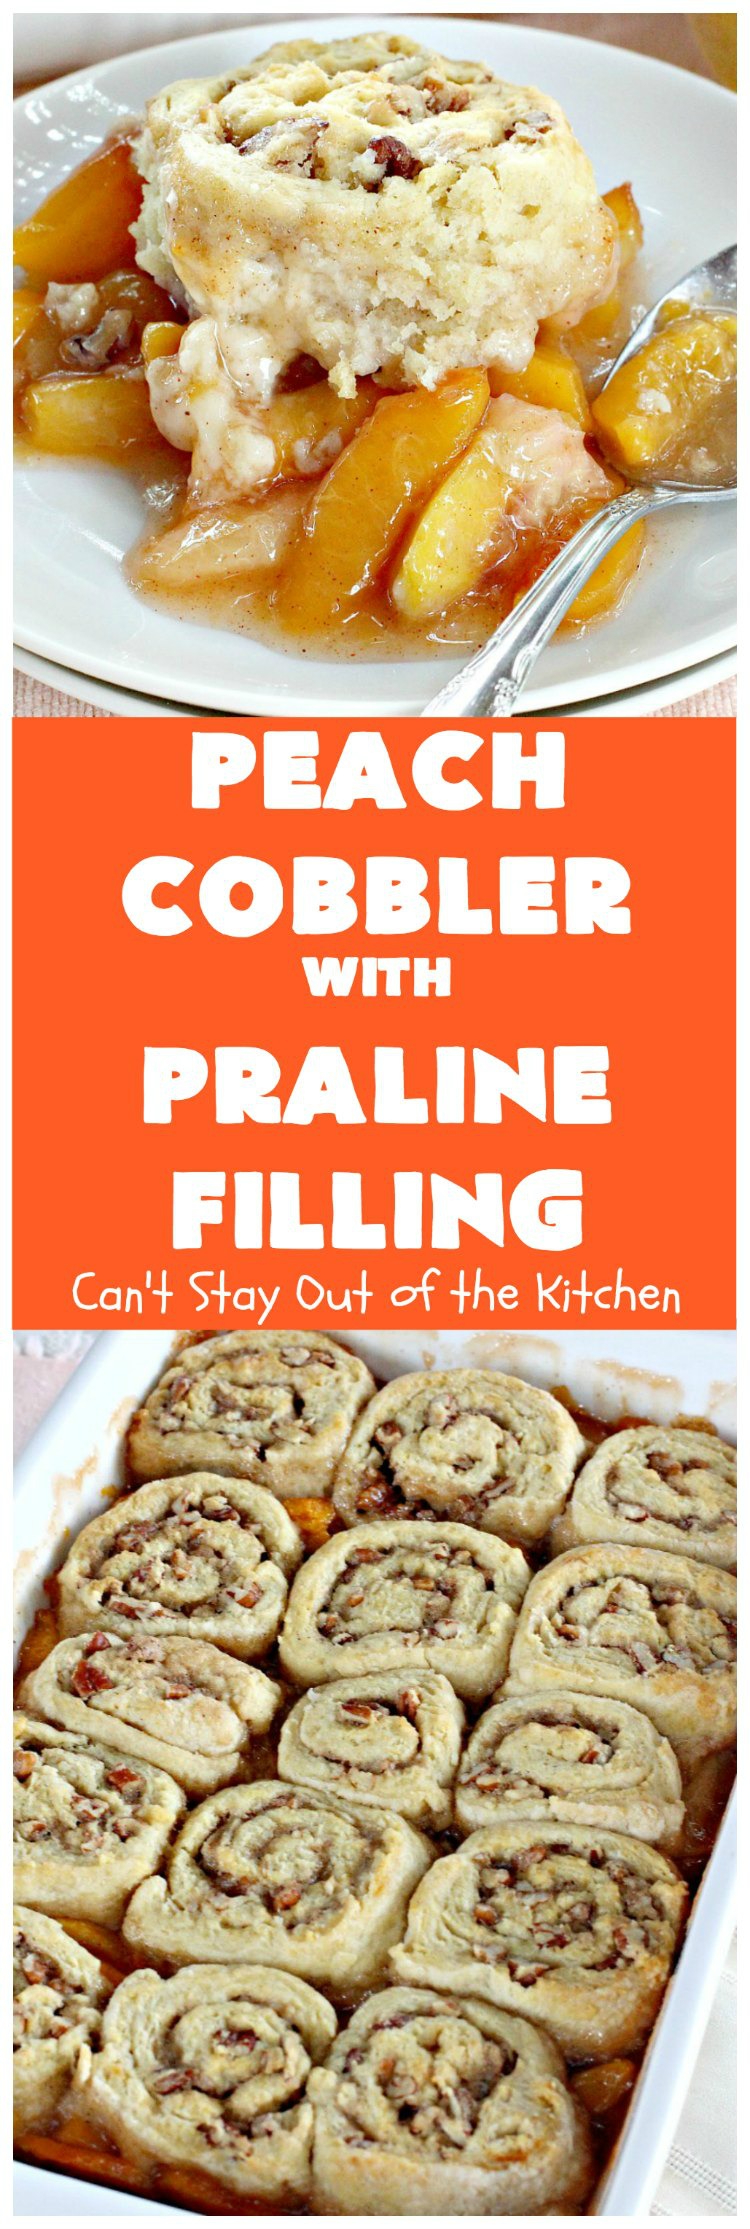 Peach Cobbler with Praline Filling | Can't Stay Out of the Kitchen